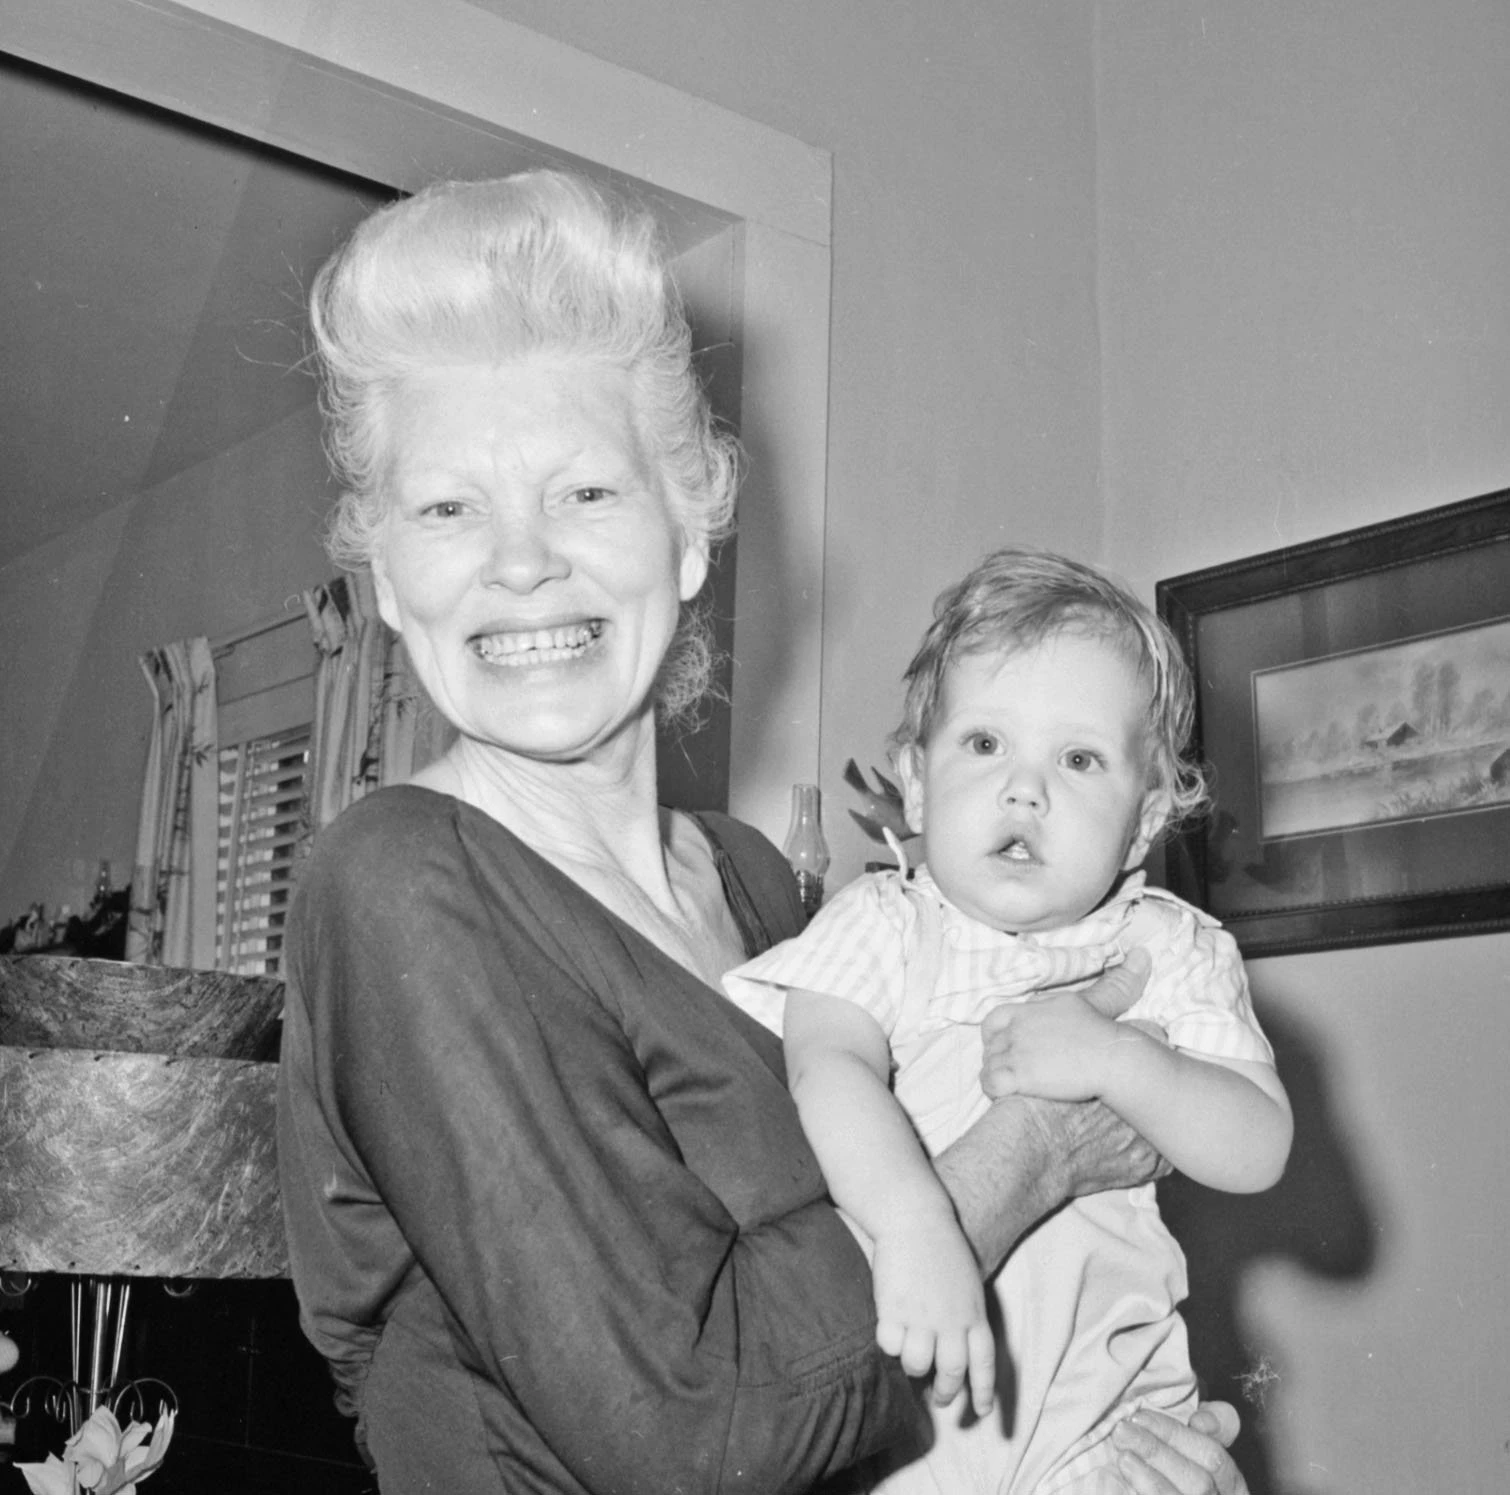 A light-skinned woman with blonde hair holds a young child. The woman has a big smile on her face and is looking straight at the camera. She is inside a home. The baby has a head full of hair and has his mouth open.